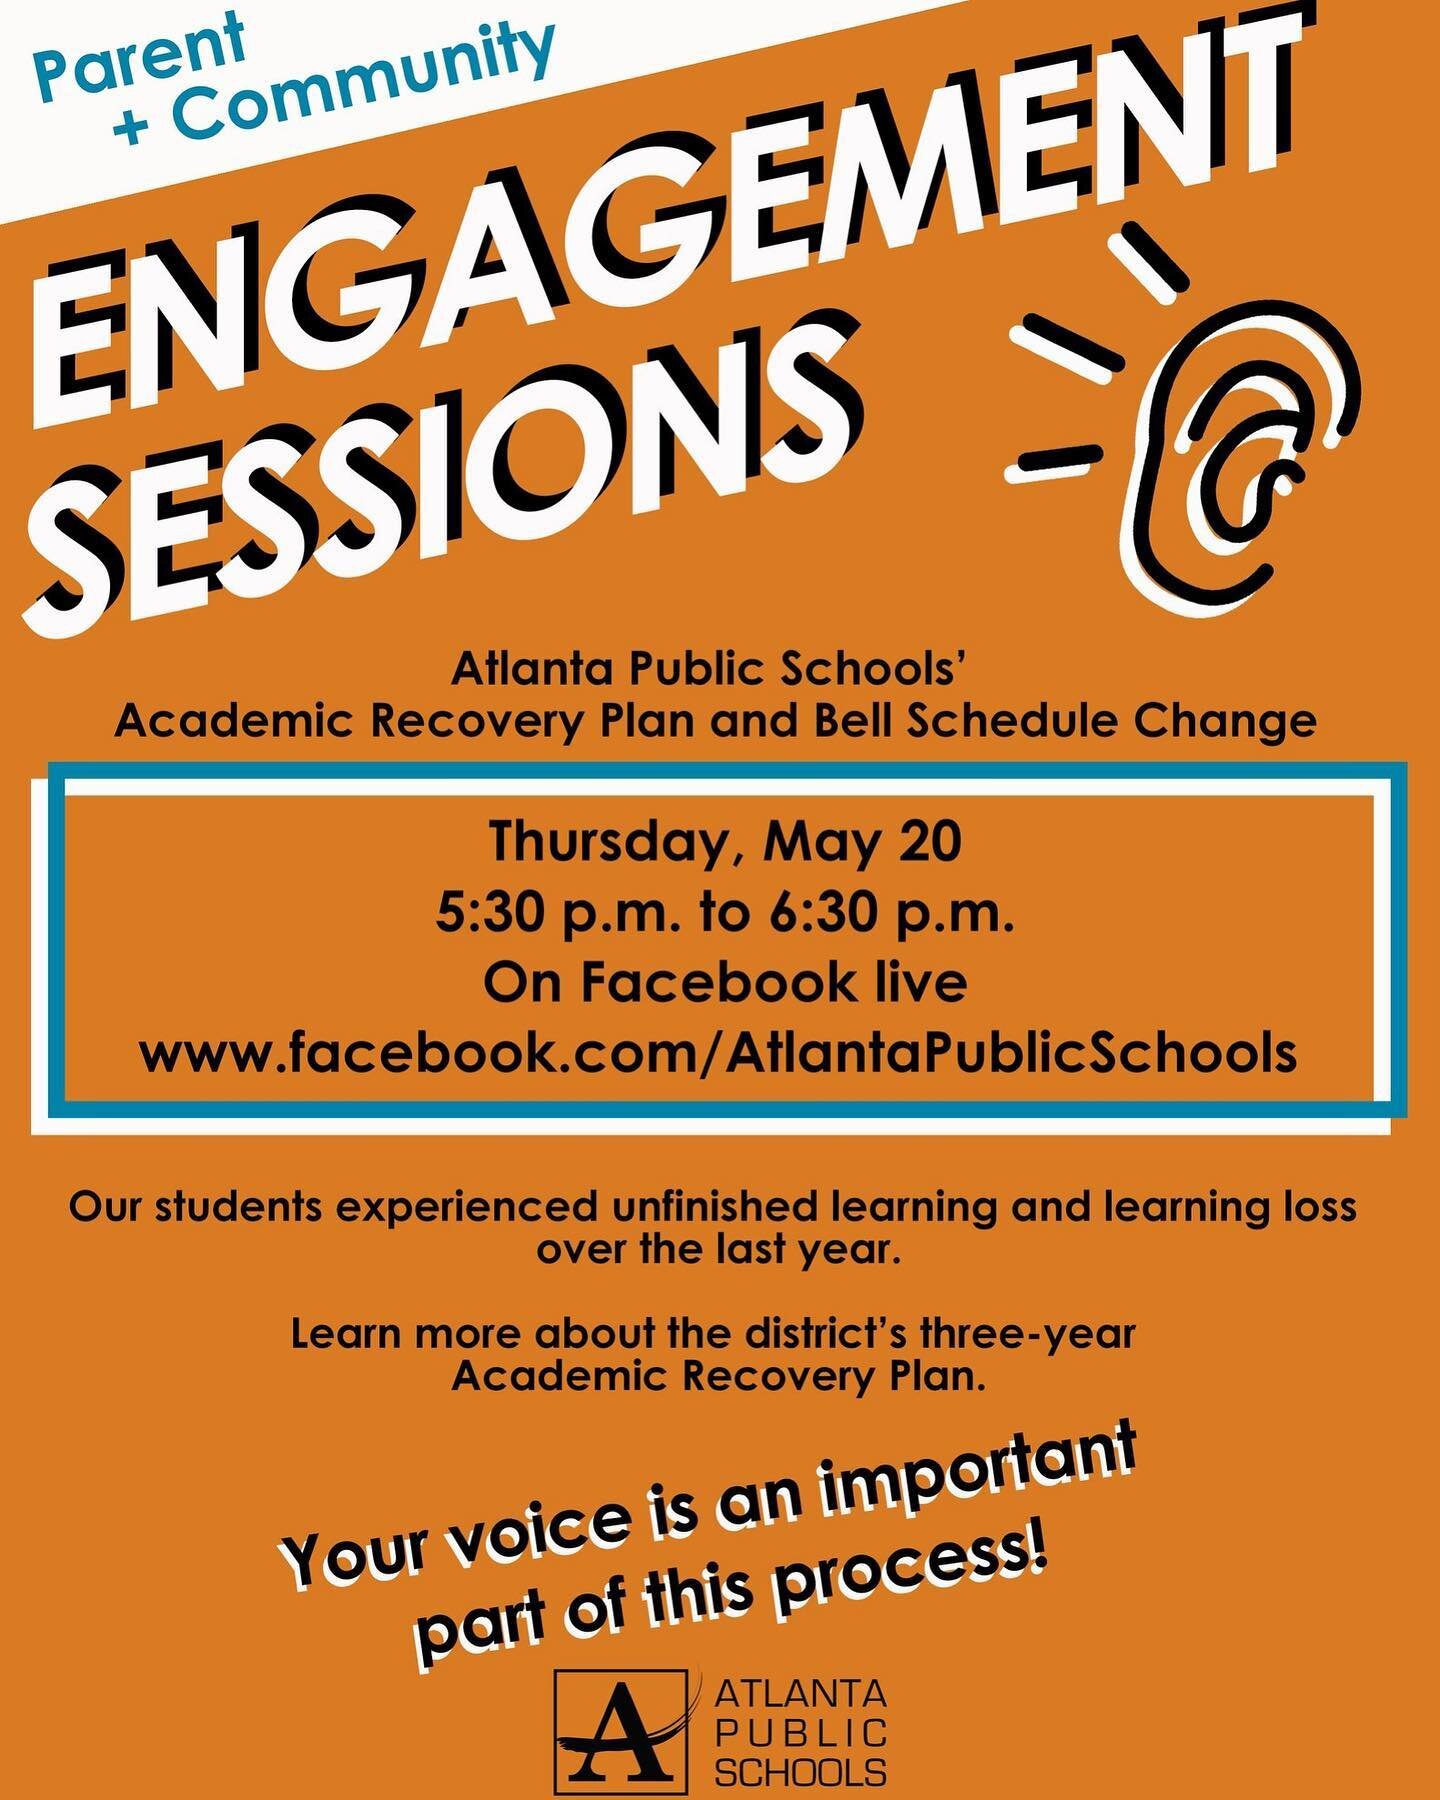 Your voice is important! Students experienced unfinished learning and learning loss over the last year. Join @apsupdate for a parent + community engagement session tonight, Thursday, May 20 from 5:30 p.m. - 6:30 p.m. on APS Facebook Live! Click the l